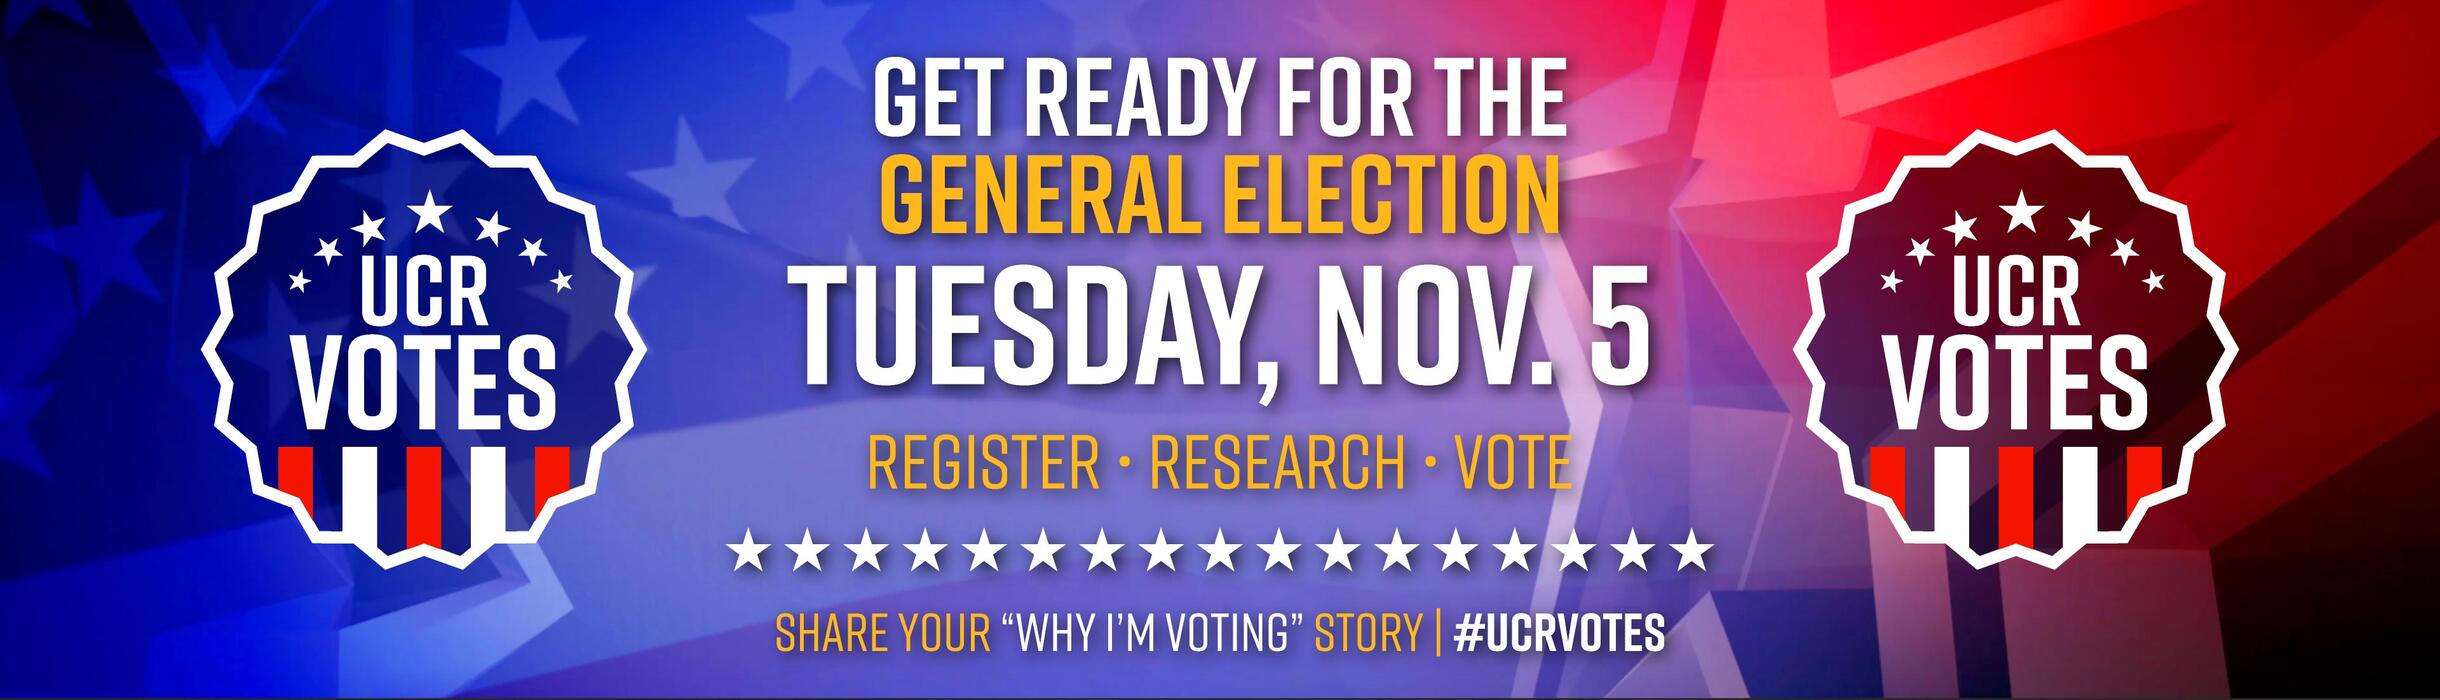 GET READY FOR THE General Election Tuesday, Nov. 5 | REGISTER • RESEARCH • VOTE | SHARE YOUR “WHY I’M VOTING” STORY | #UCRVOTES